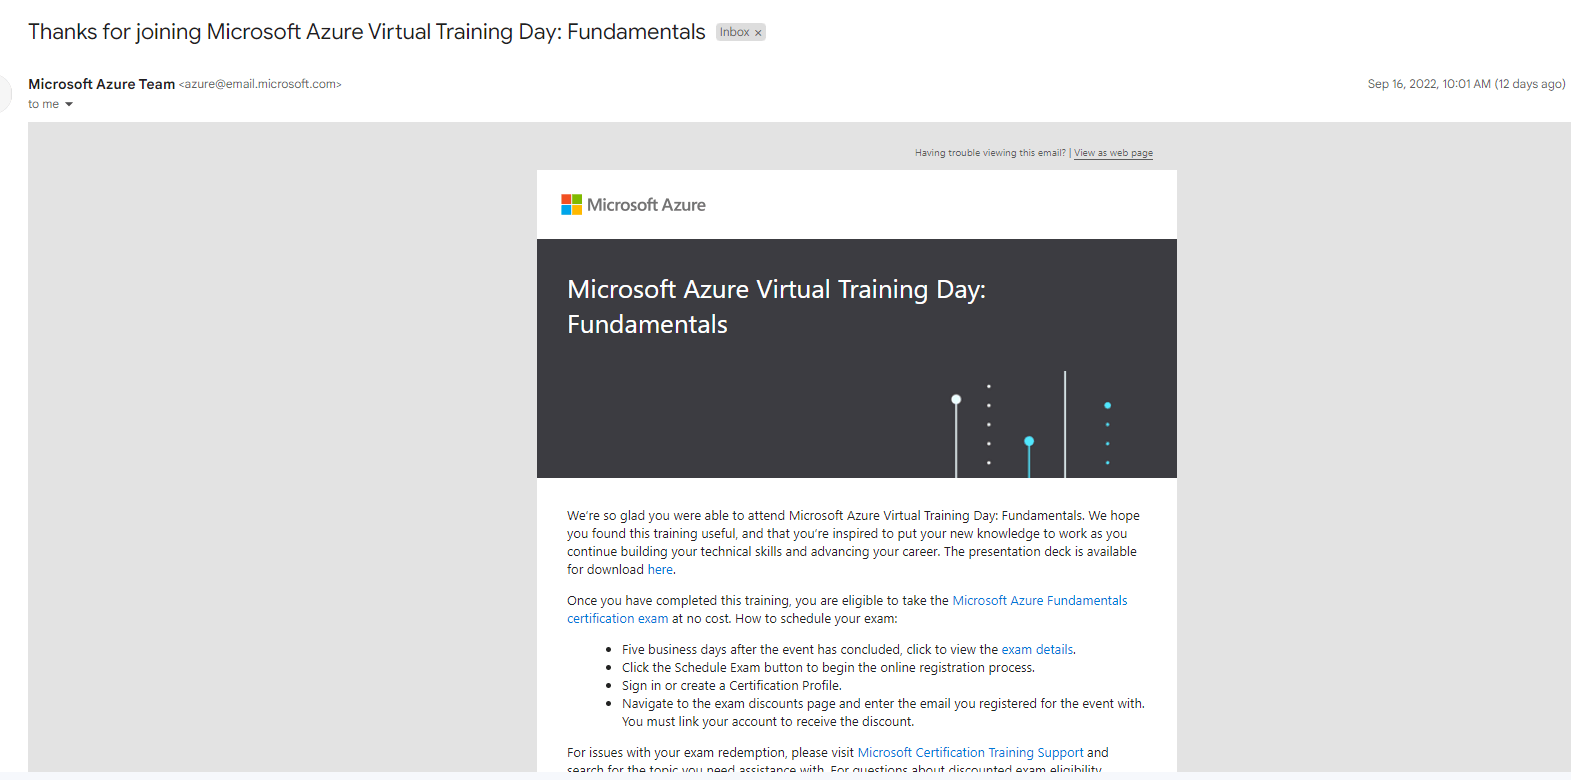 Executie Psychologisch Huiswerk maken Discount not received for event "Microsoft Azure Virtual Training - Training,  Certification, and Program Support